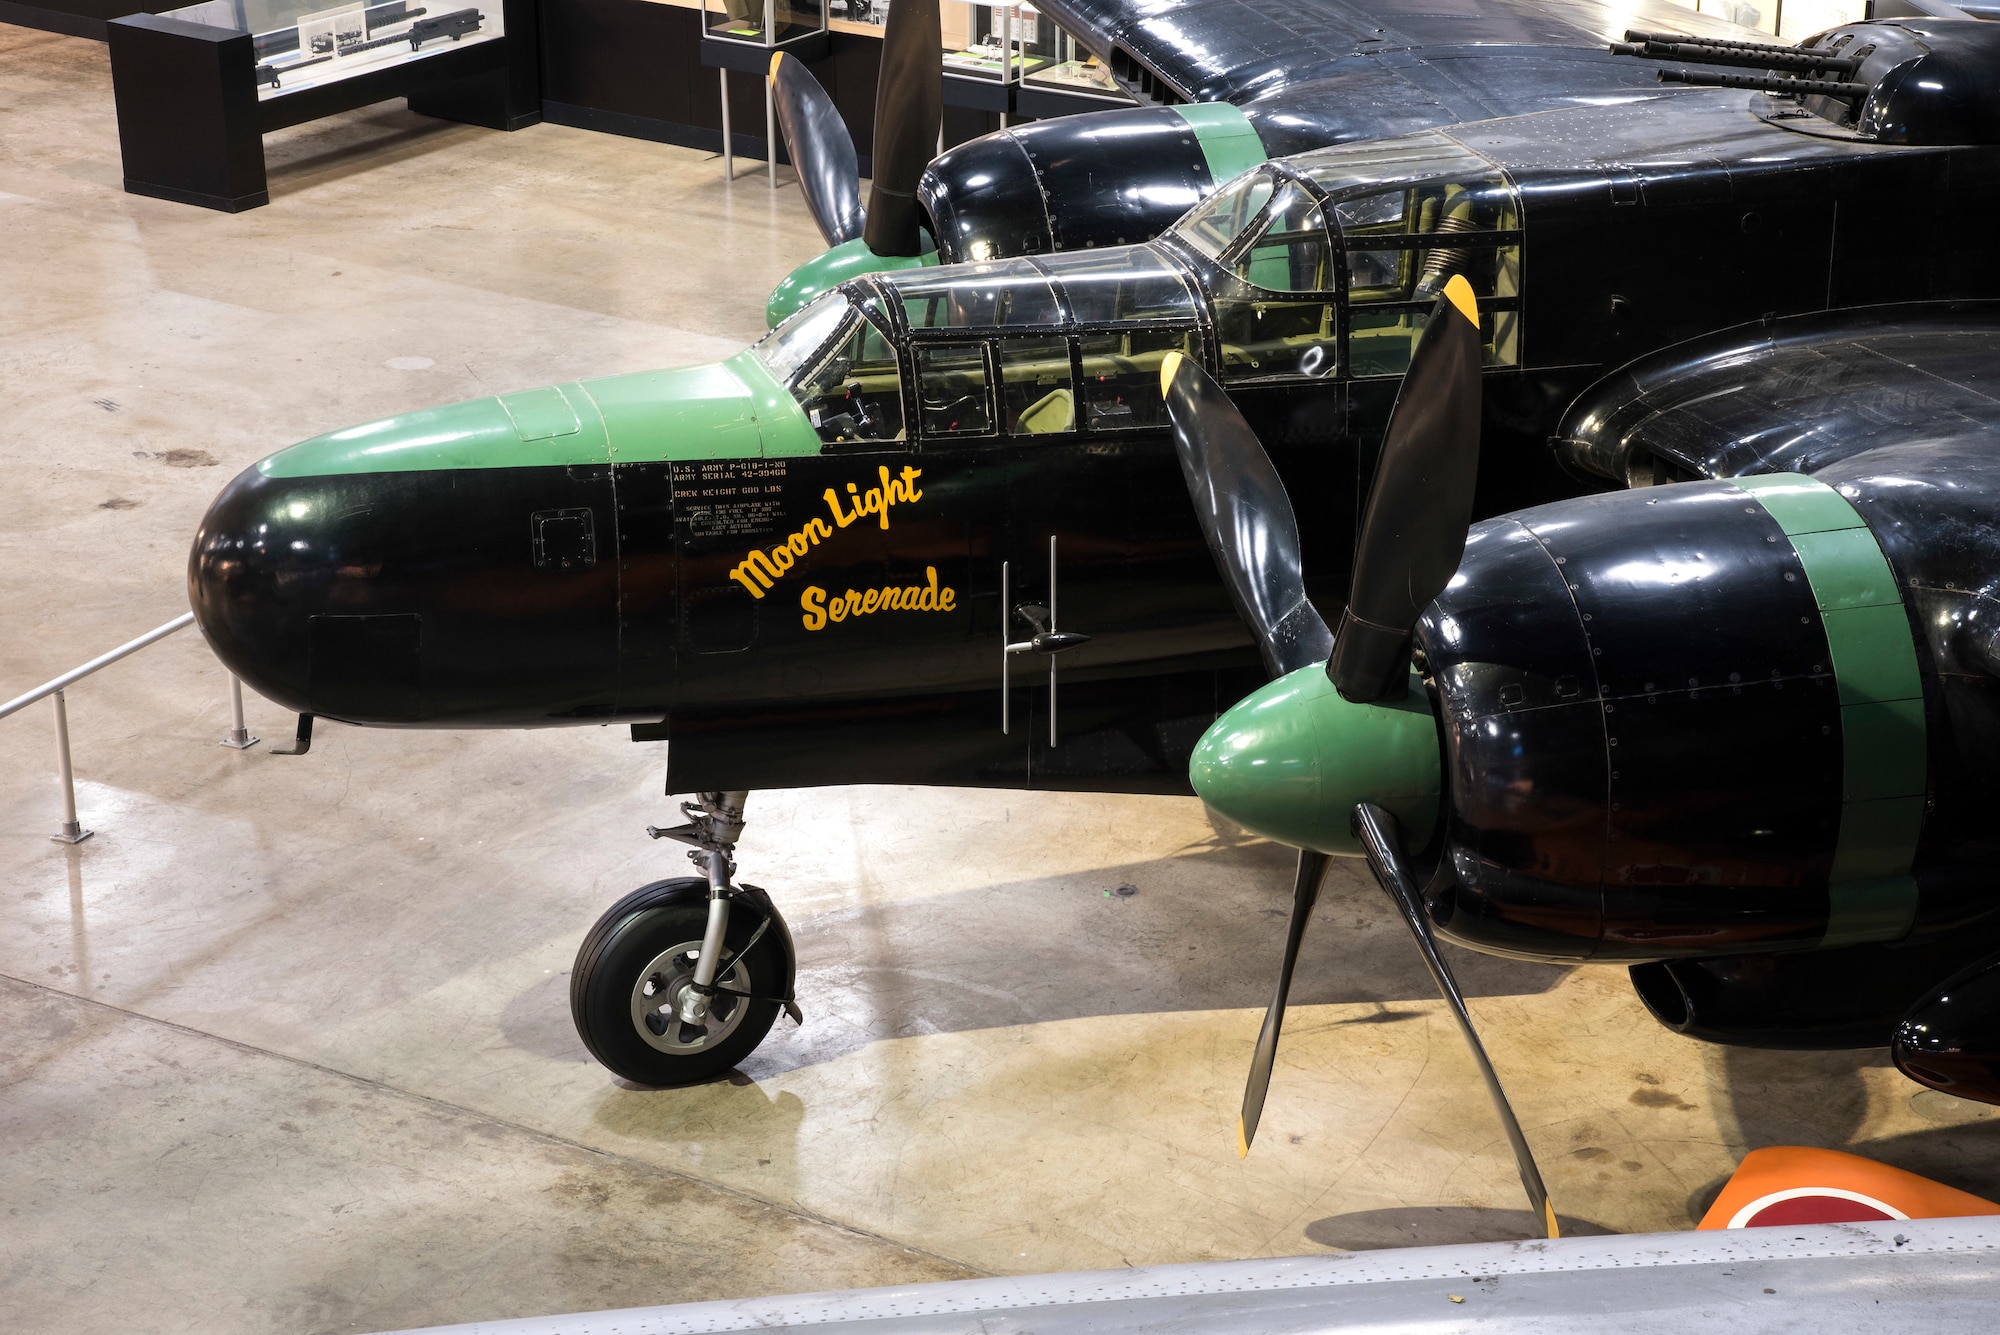 DAYTON, Ohio -- The Northrop P-61C Black Widow on display in the  World War II Gallery at the National Museum of the United States Air Force. (U.S. Air Force photo by Ken LaRock)